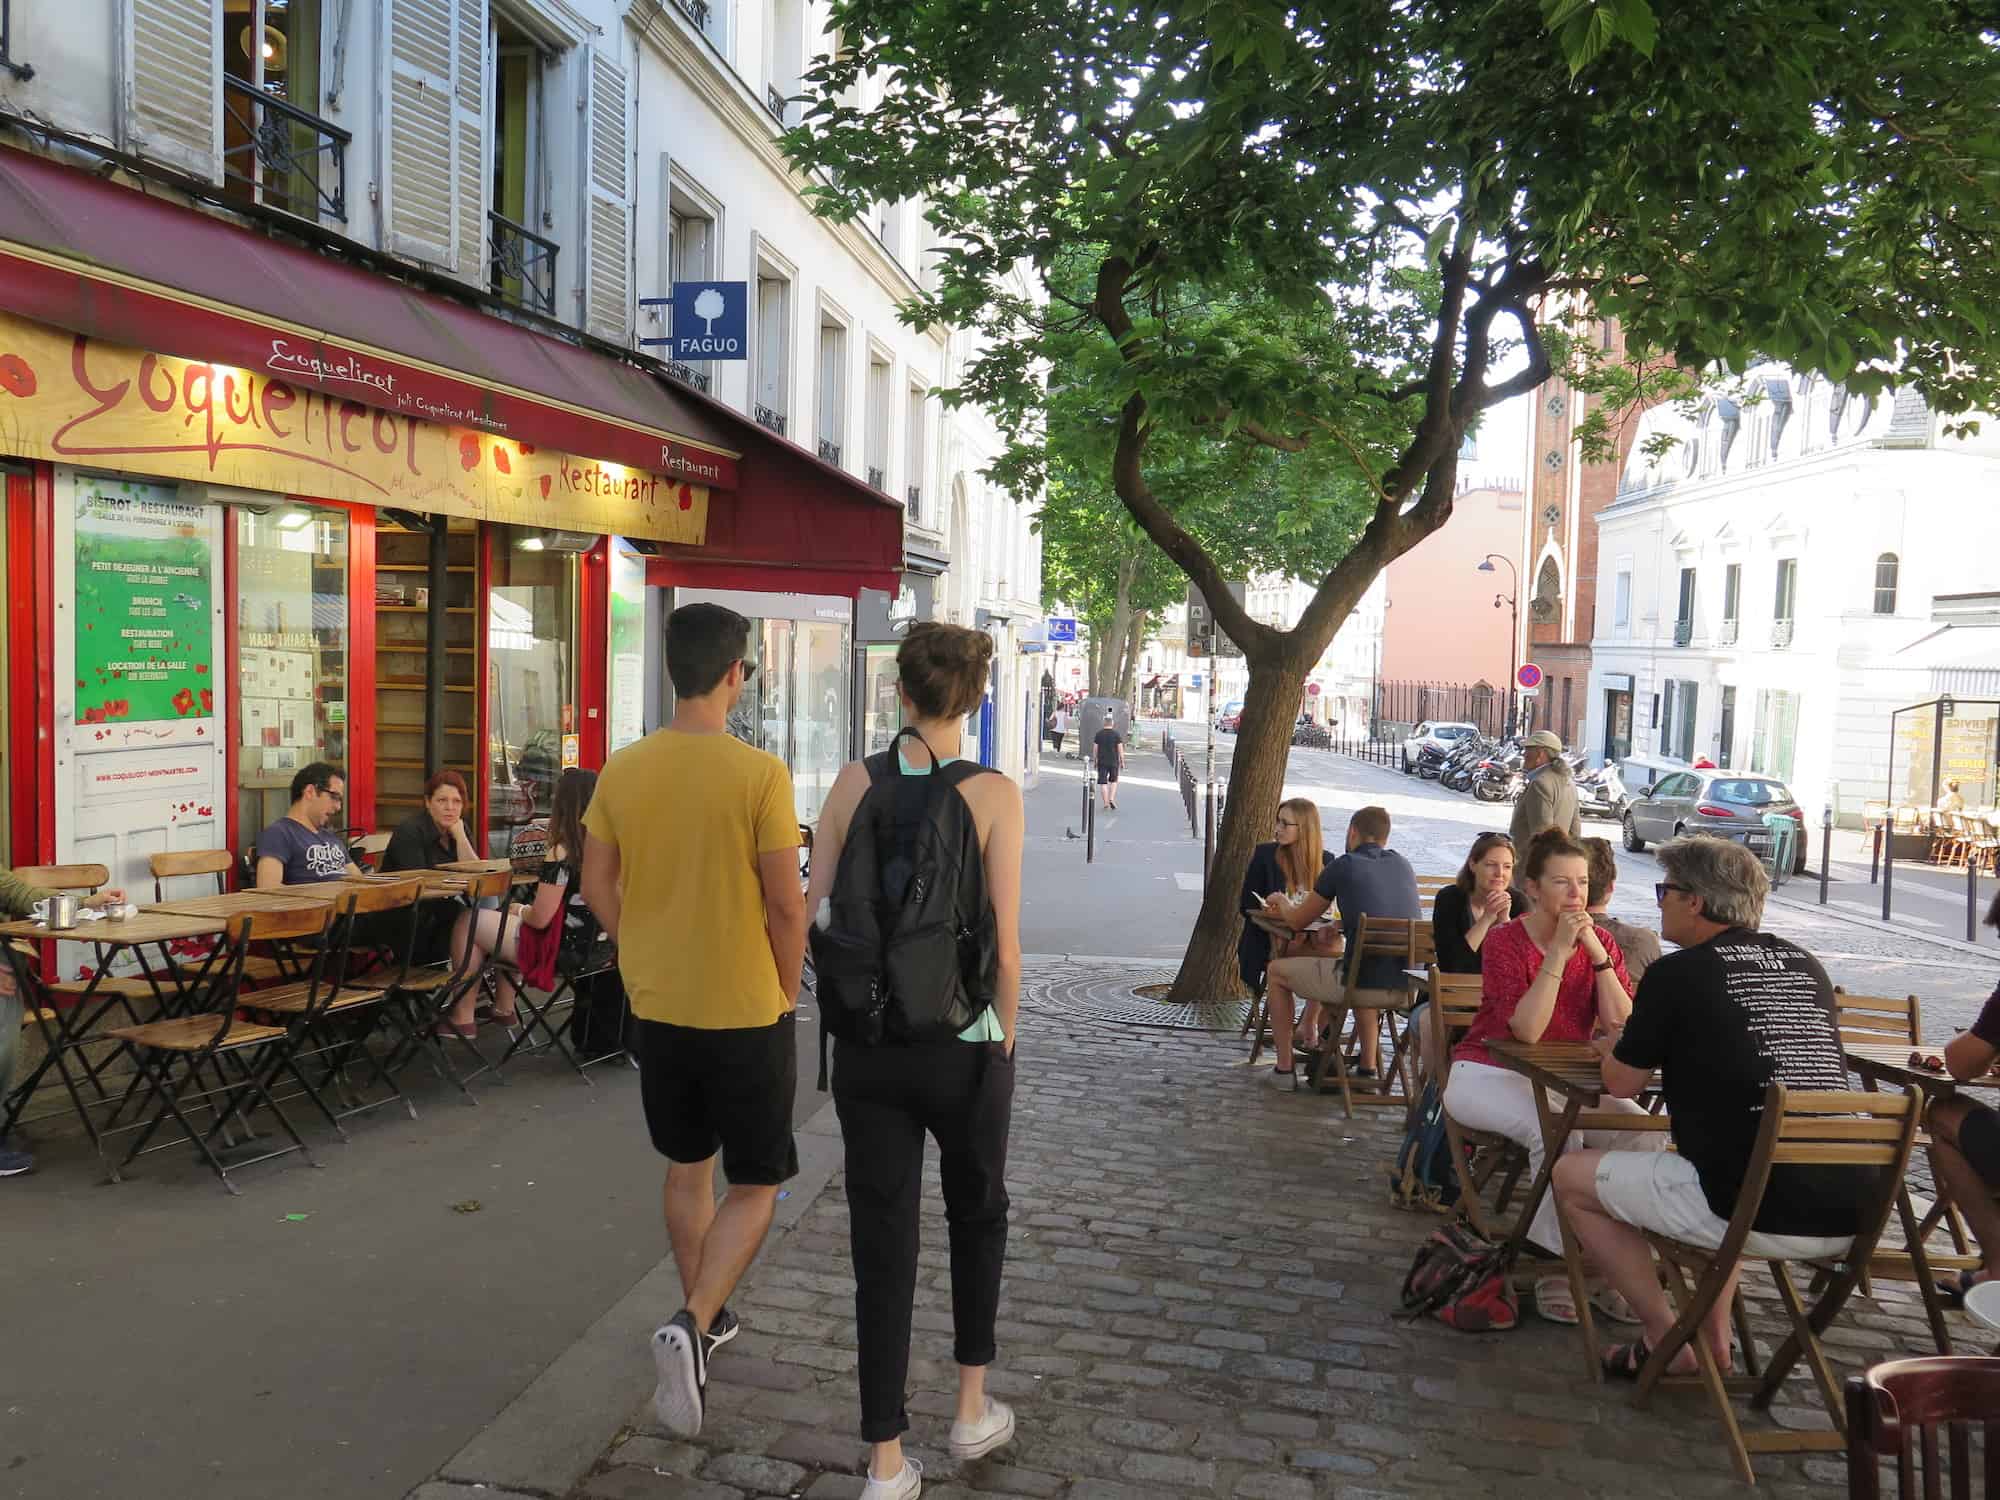 One of the best bakeries in Paris is Coquericot, which is also a restaurant in Montmartre with a terrace in summer.